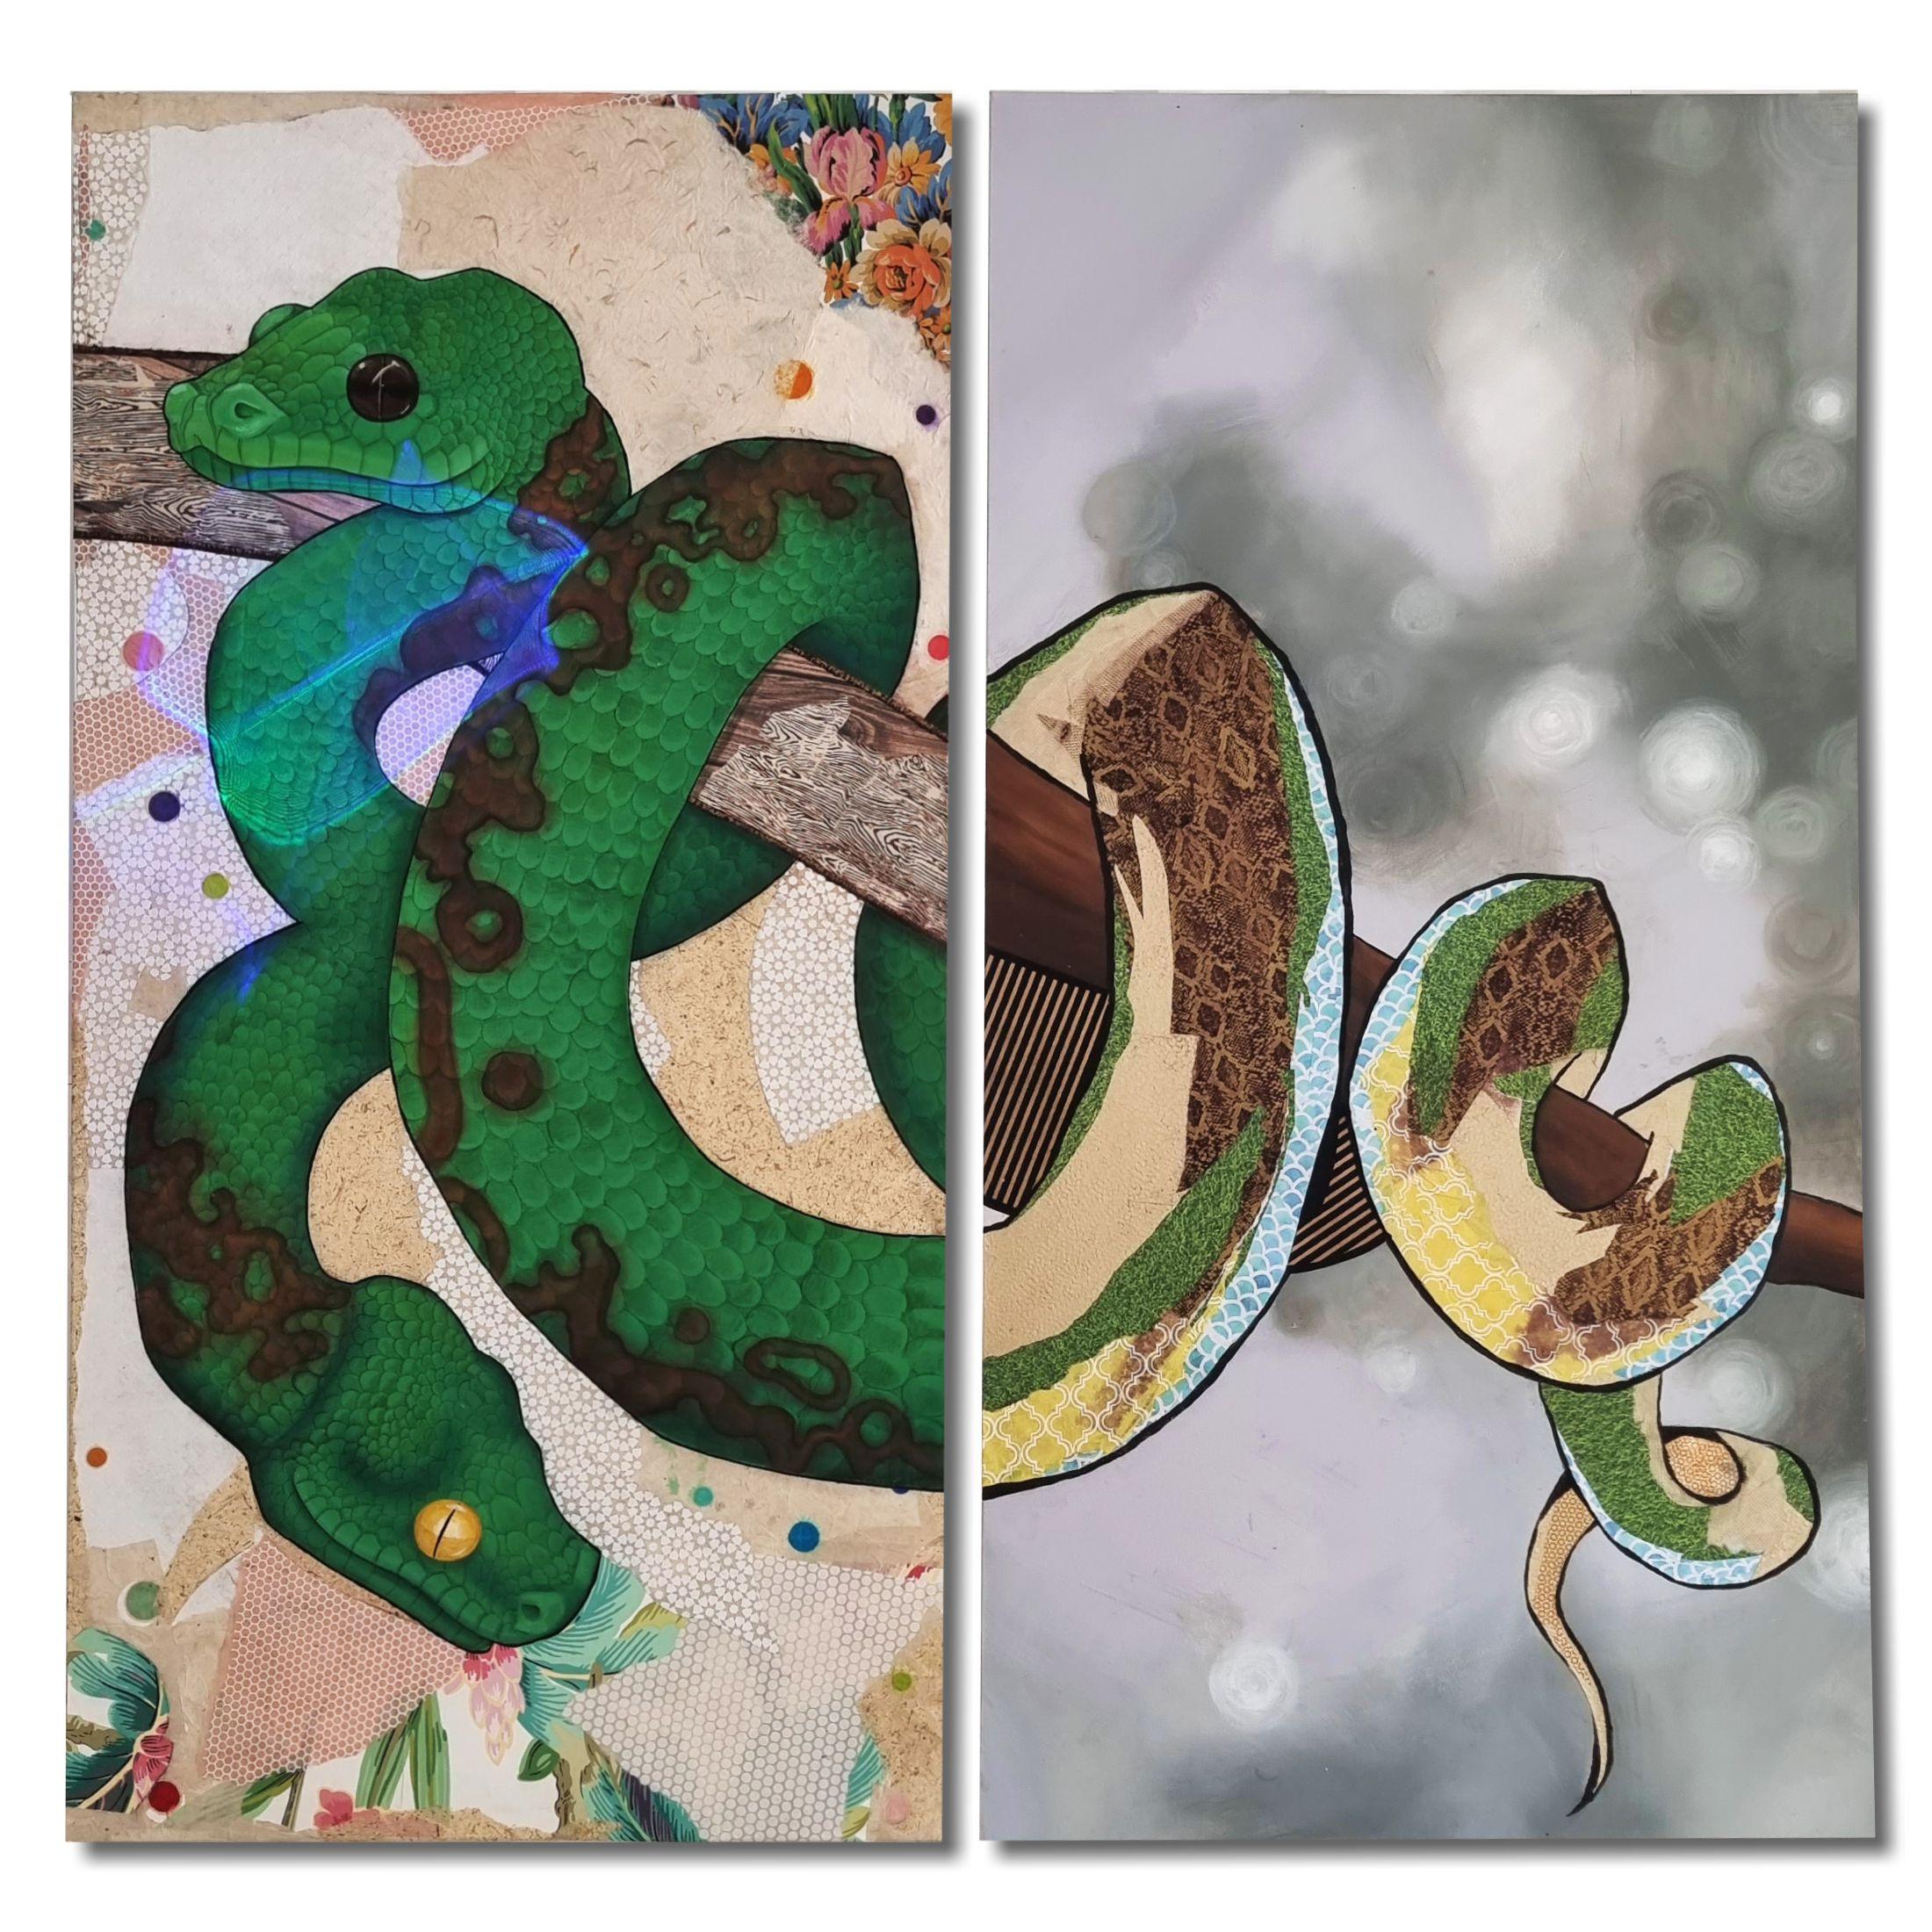 Amy Young Figurative Painting - Serpent Diptych (Snake, Street Art, Collage, Colorful - ~54% OFF LIST PRICE)